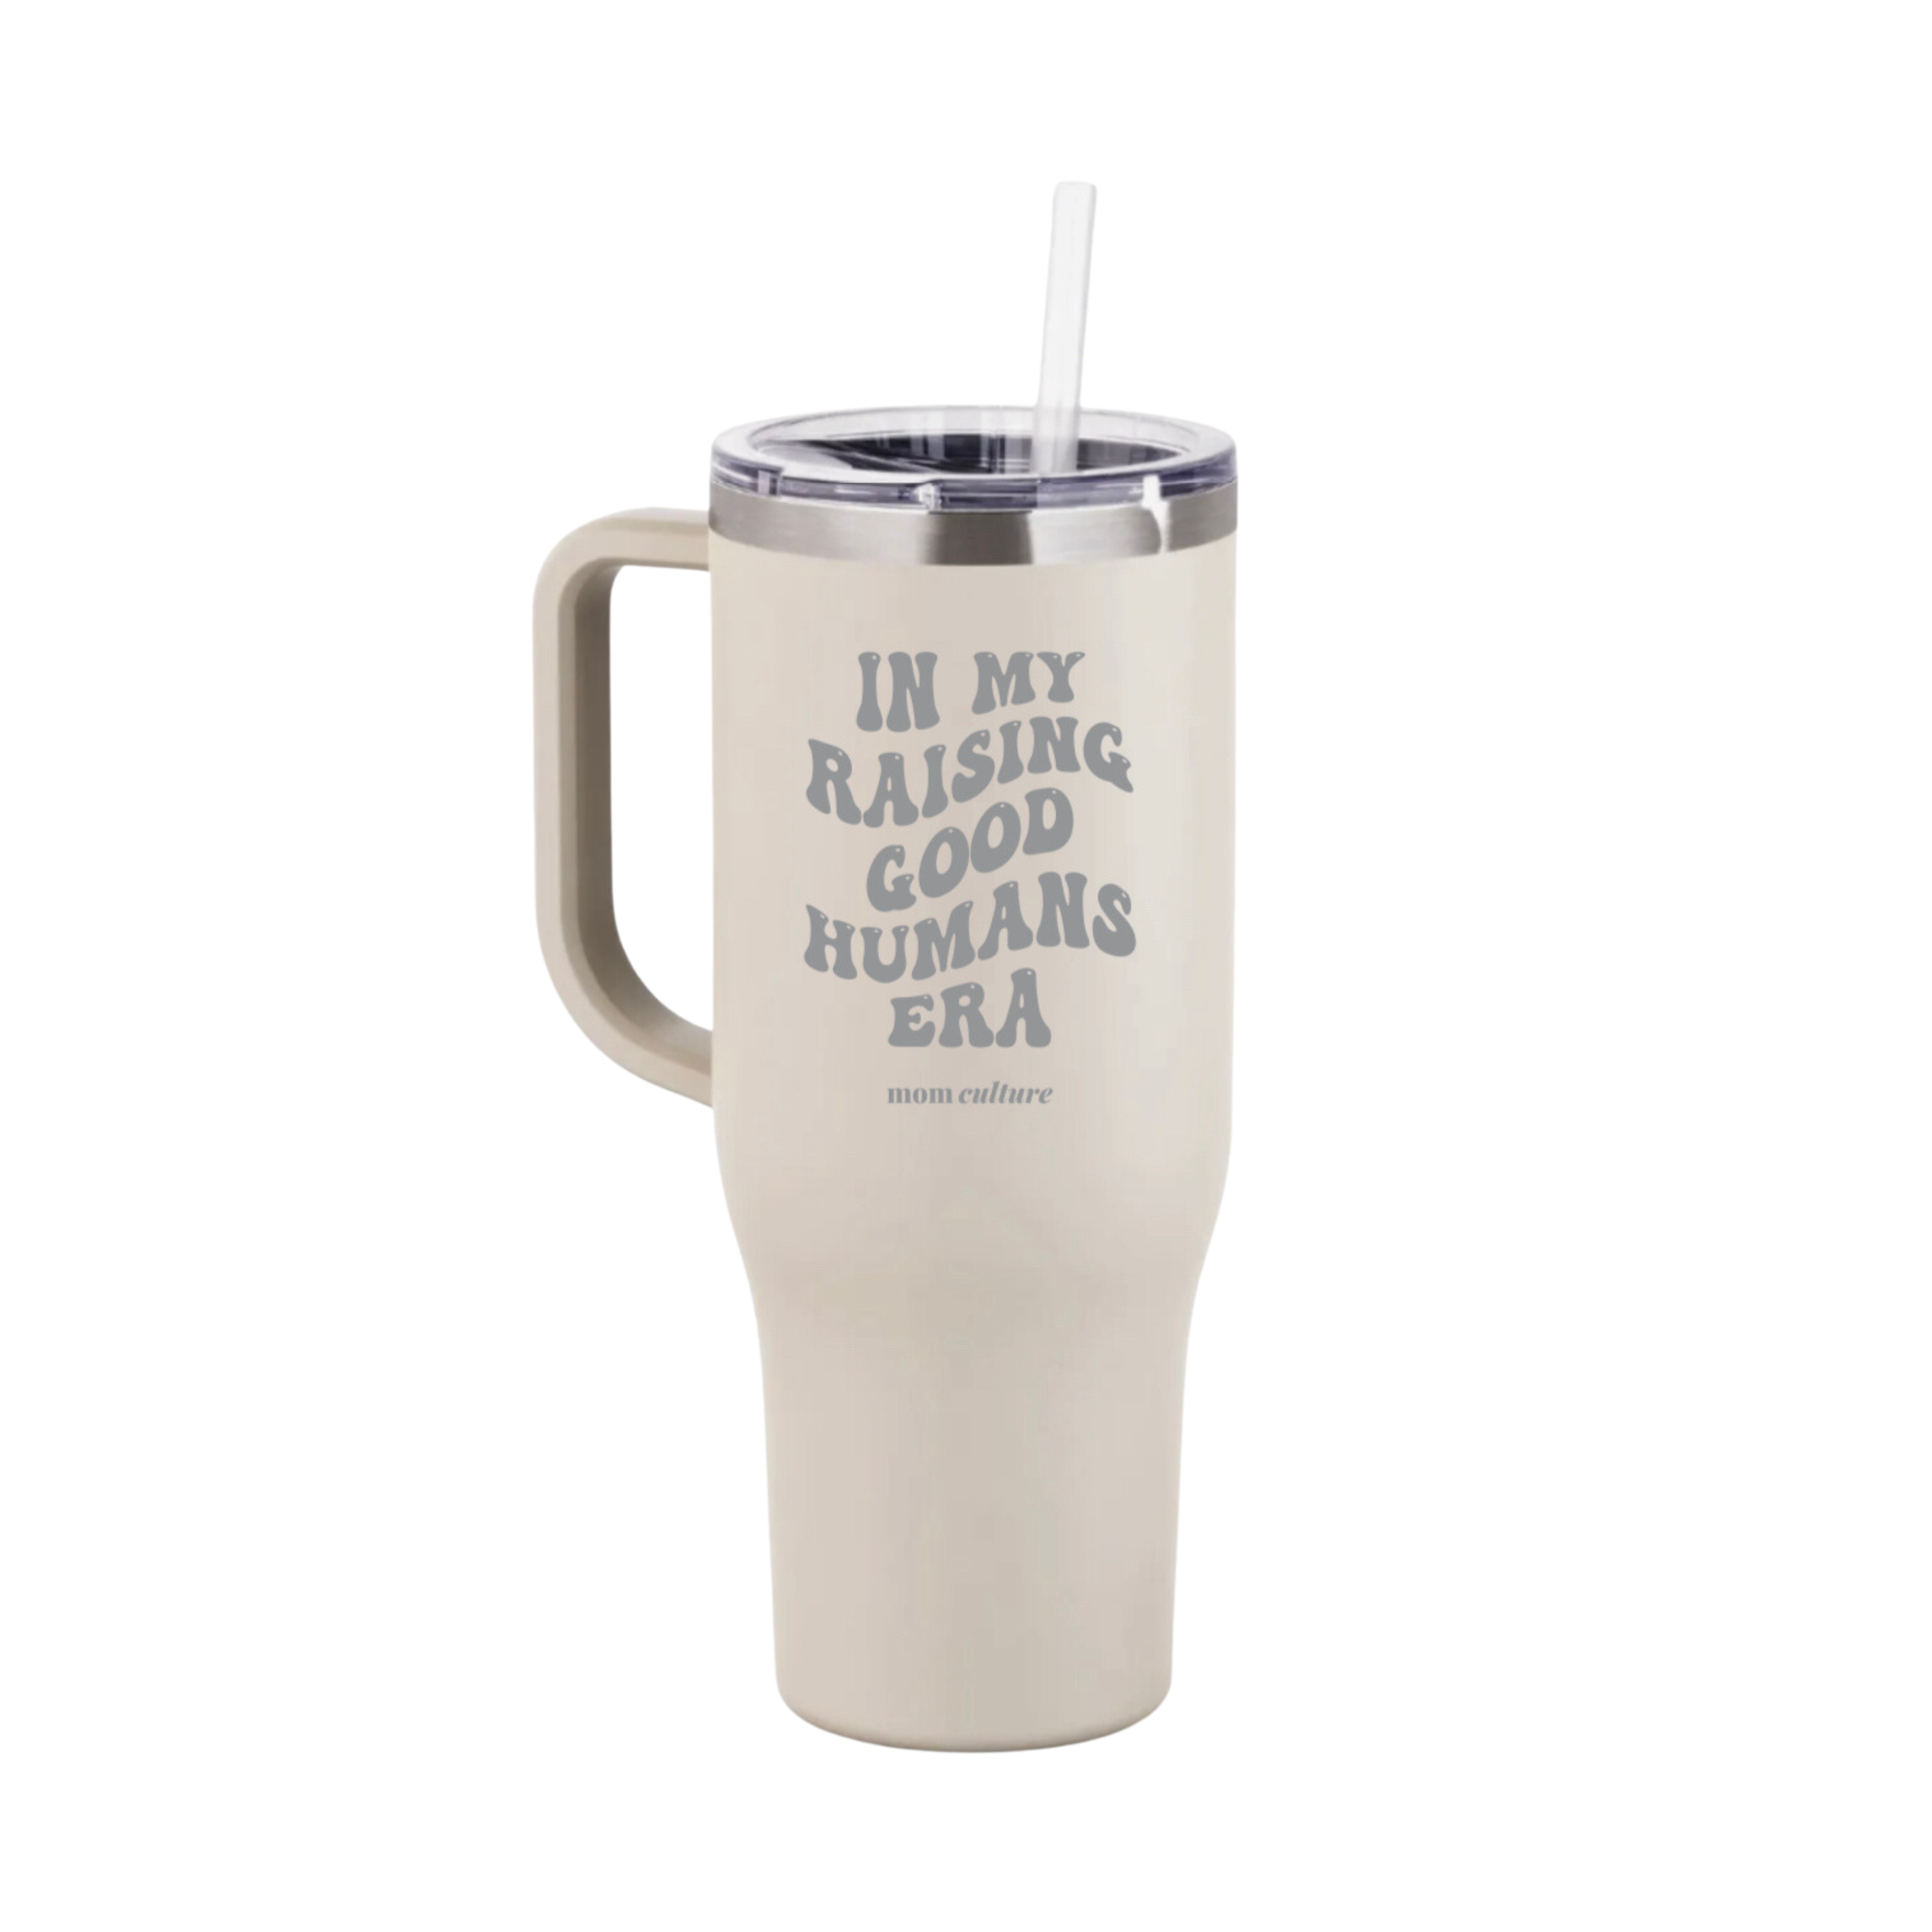 40 oz 'Mom Culture' Tumbler: Hydrate with Style